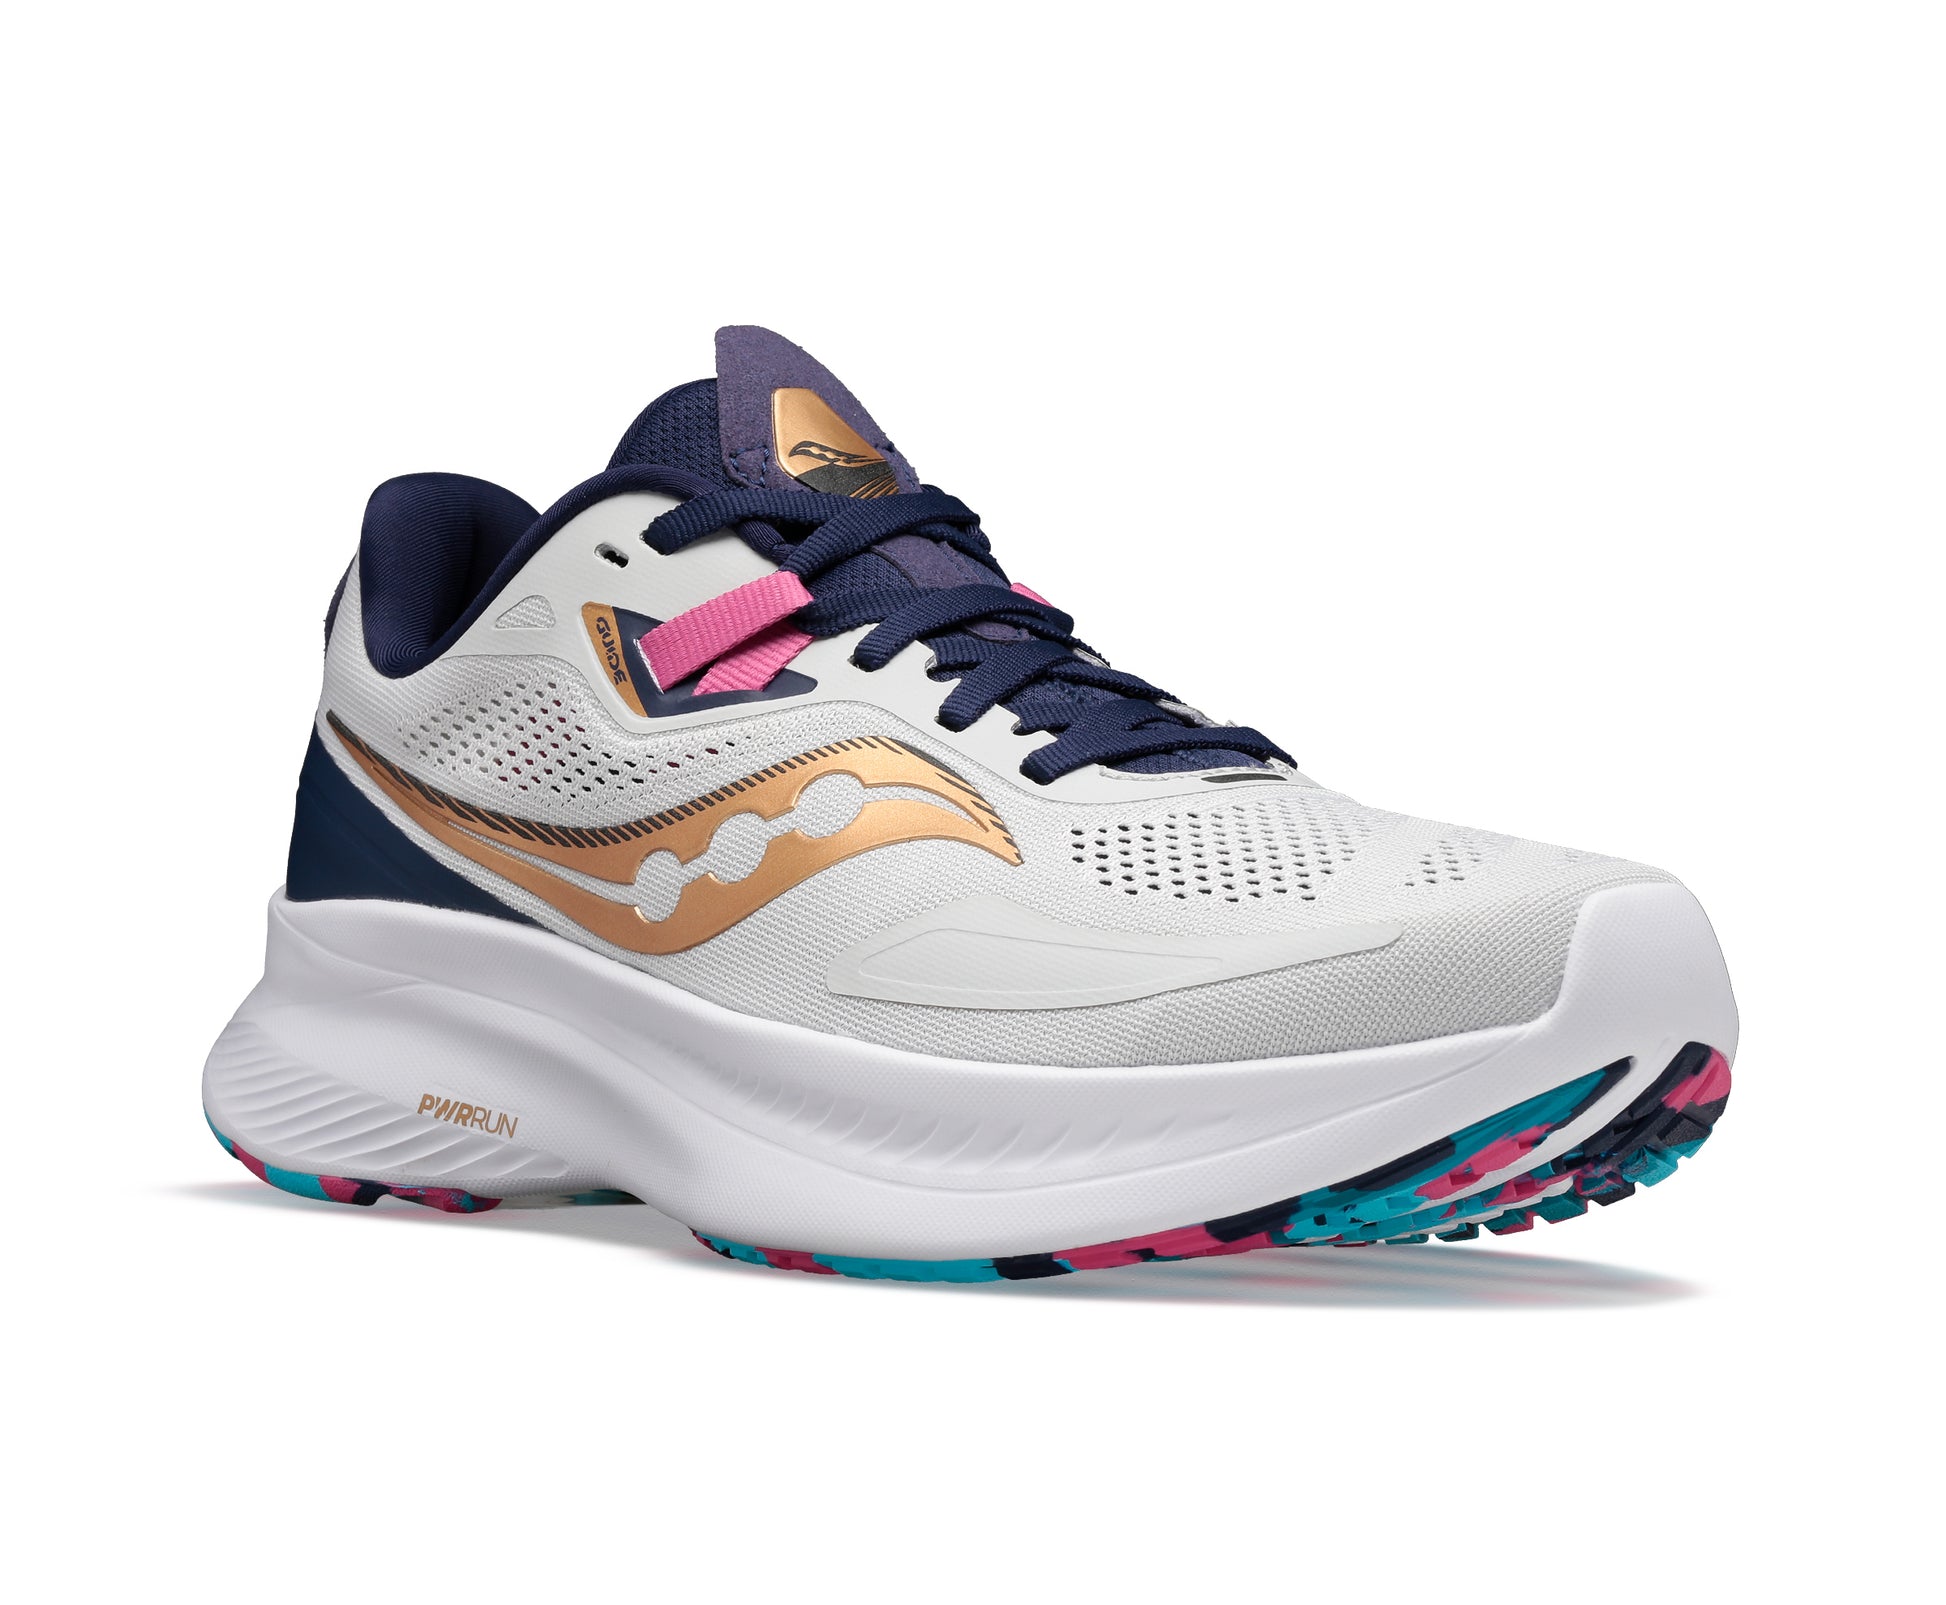 Saucony Guide 15 women's stability everyday running shoe